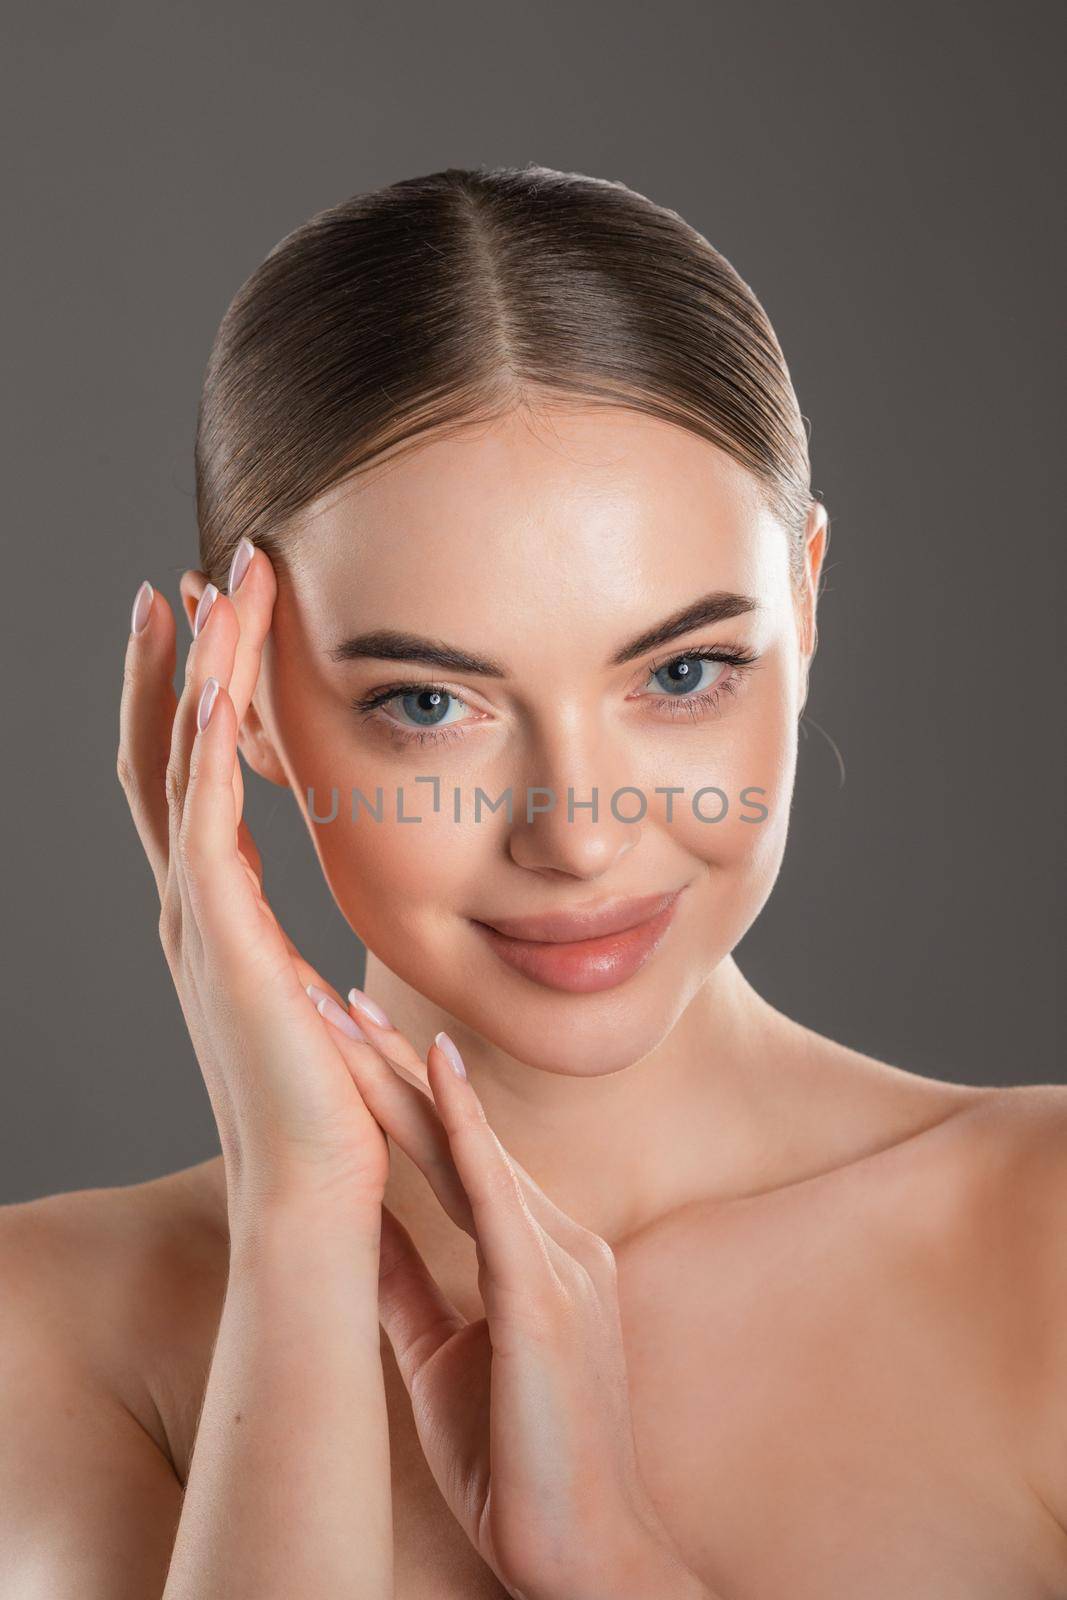 Beauty Portrait. Beautiful Spa Woman Touching her Face. Perfect Fresh Skin. Pure Beauty Model Girl. Youth and Skin Care Concept